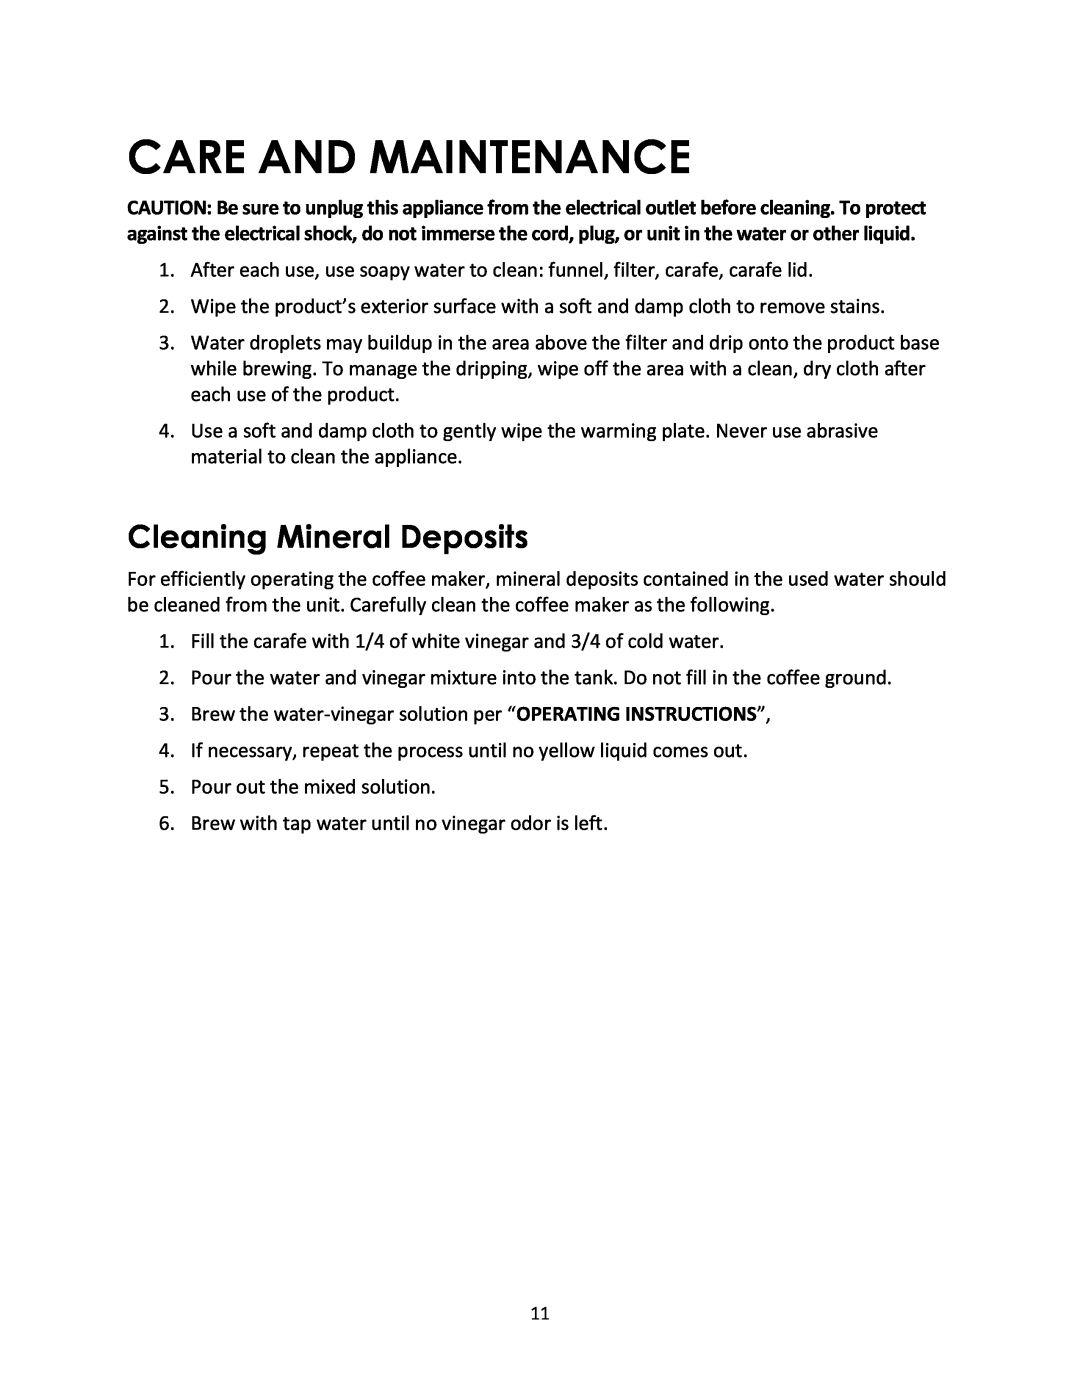 Magic Chef MCSCM10PGBST instruction manual Care And Maintenance, Cleaning Mineral Deposits 